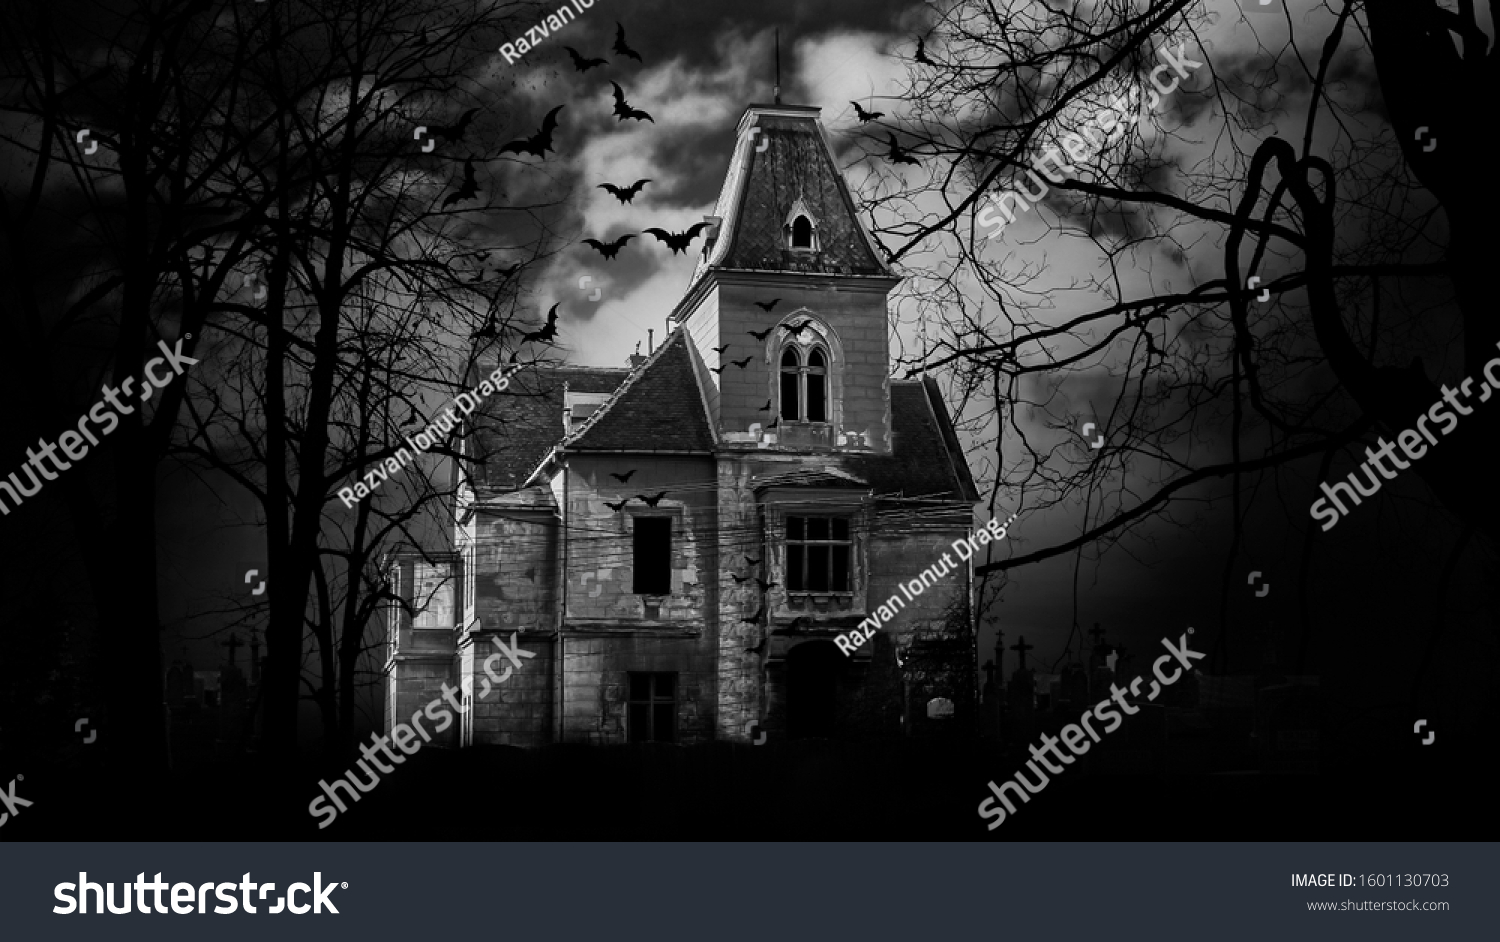 Haunted house with dark scary horror atmosphere Black and White Photography #1601130703